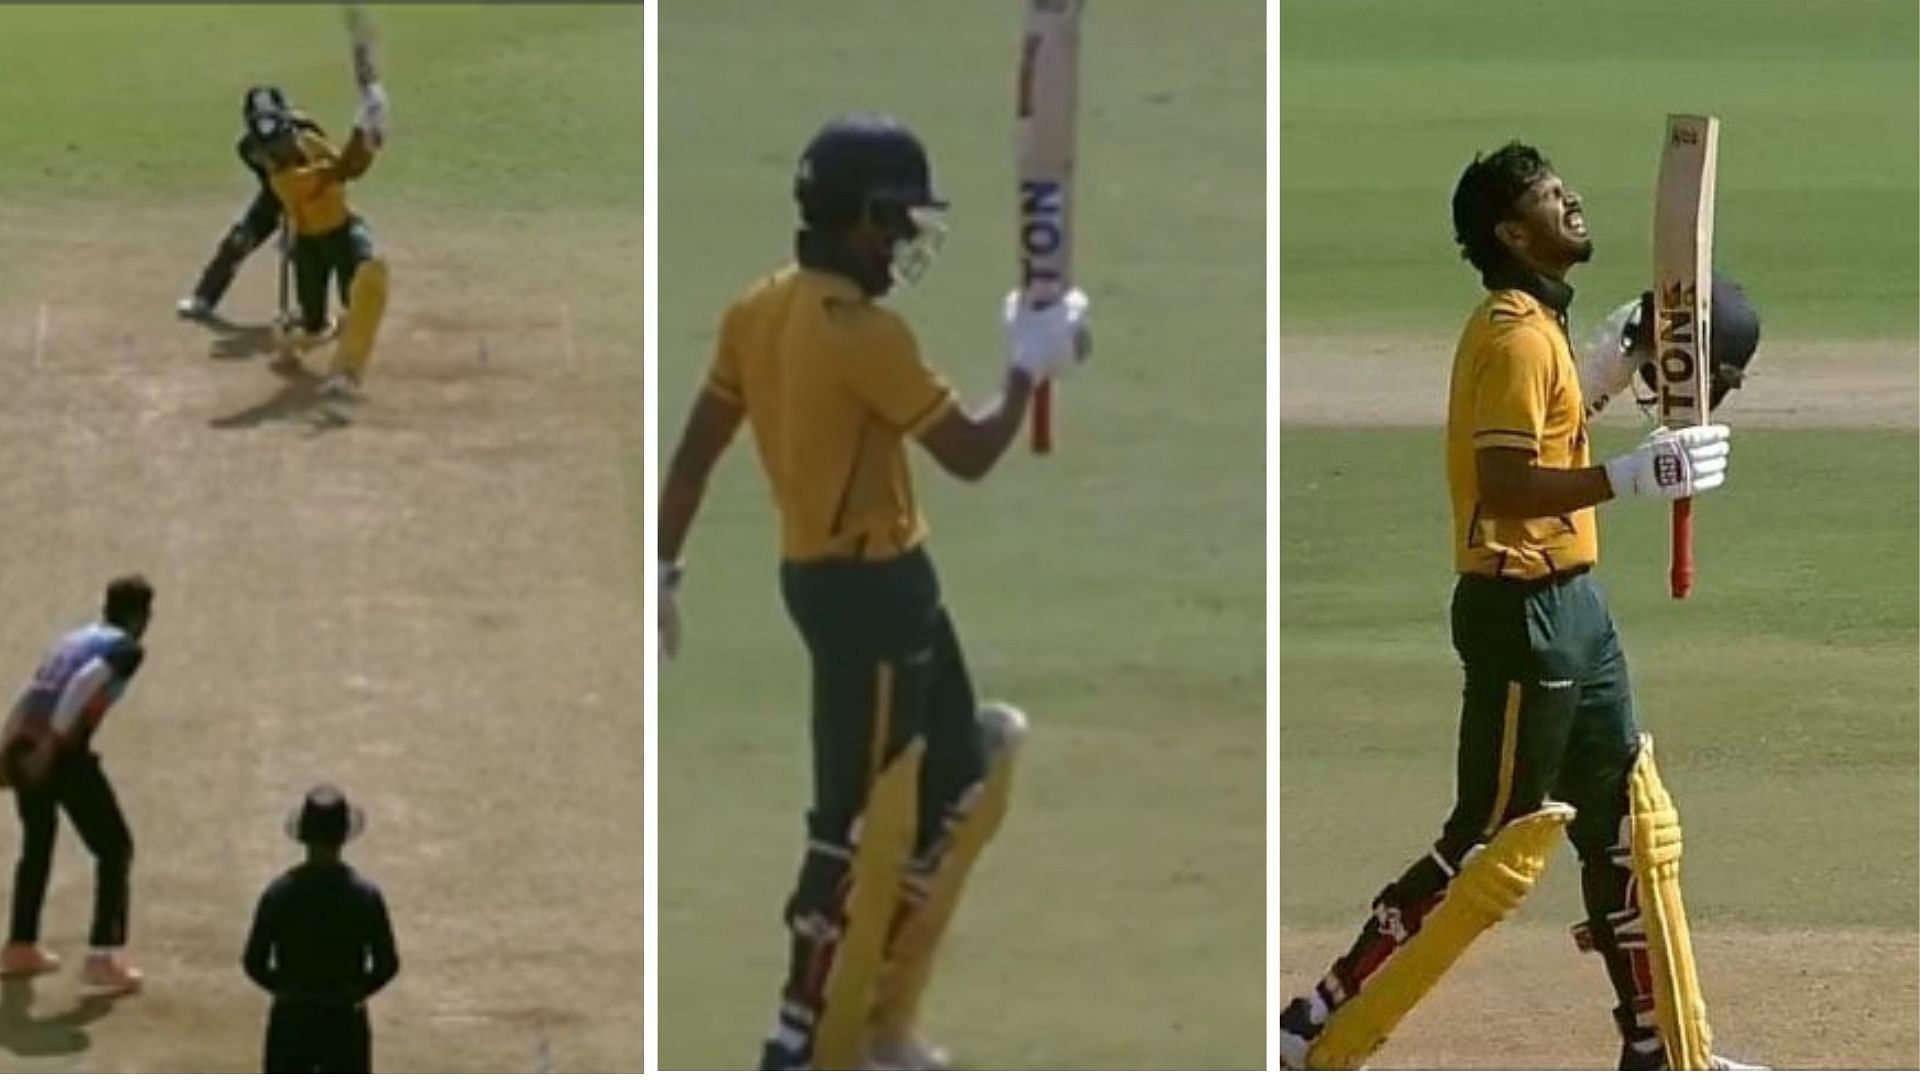 [Watch] Ruturaj Gaikwad smashes a record 7 sixes in an over; slams double hundred in Vijay Hazare Trophy QF